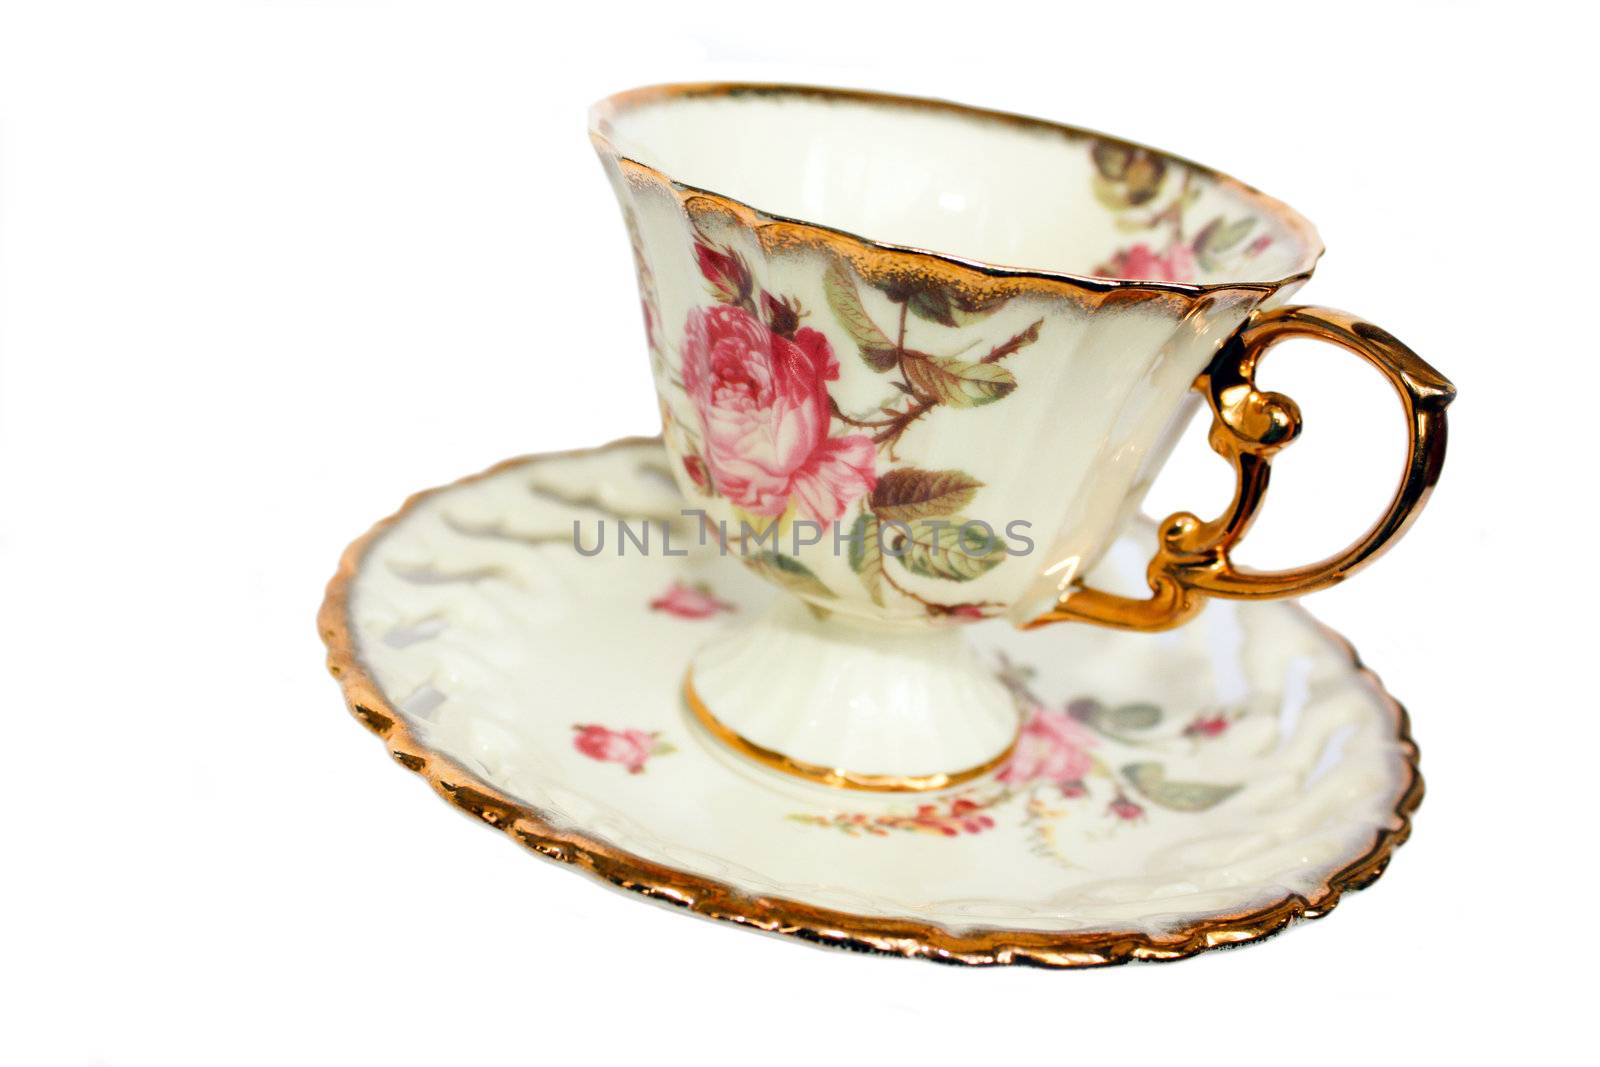 porcelain cup, porcelain saucer, drawing on the dishes, a rose on the cup, kitchenware